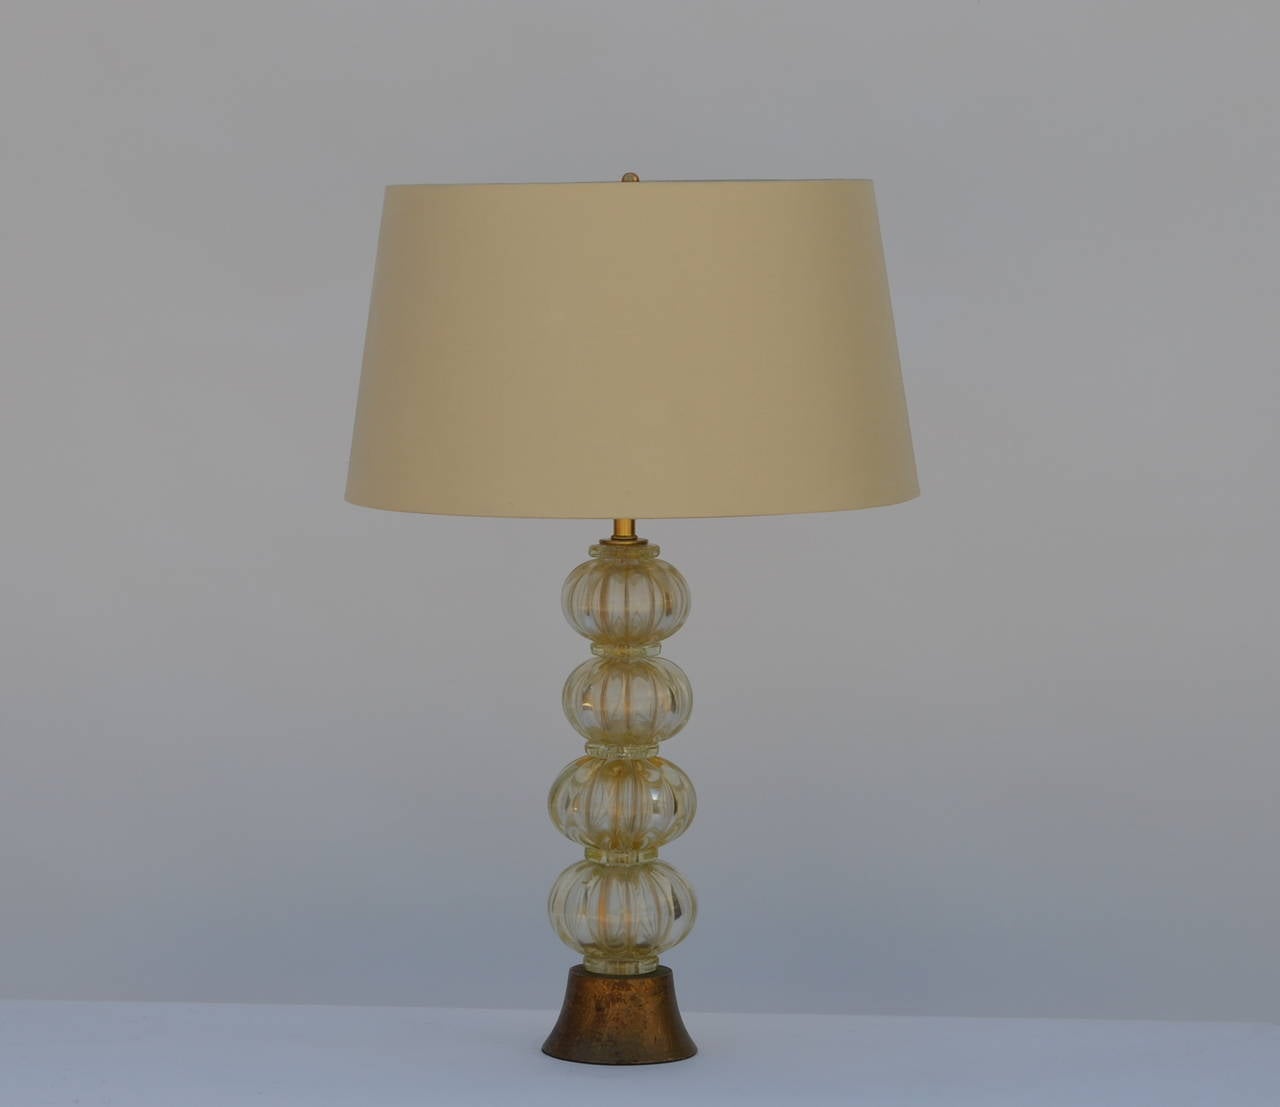 Heavy gilt Murano glass stem lamp with custom silk shade in the style of Barovier. Giltwood base. Restored and rewired with gold twist cord.

Custom shade dimensions: upper edge 16 inches, lower edge 19 inches, height 10.5 inches. Overall lamp